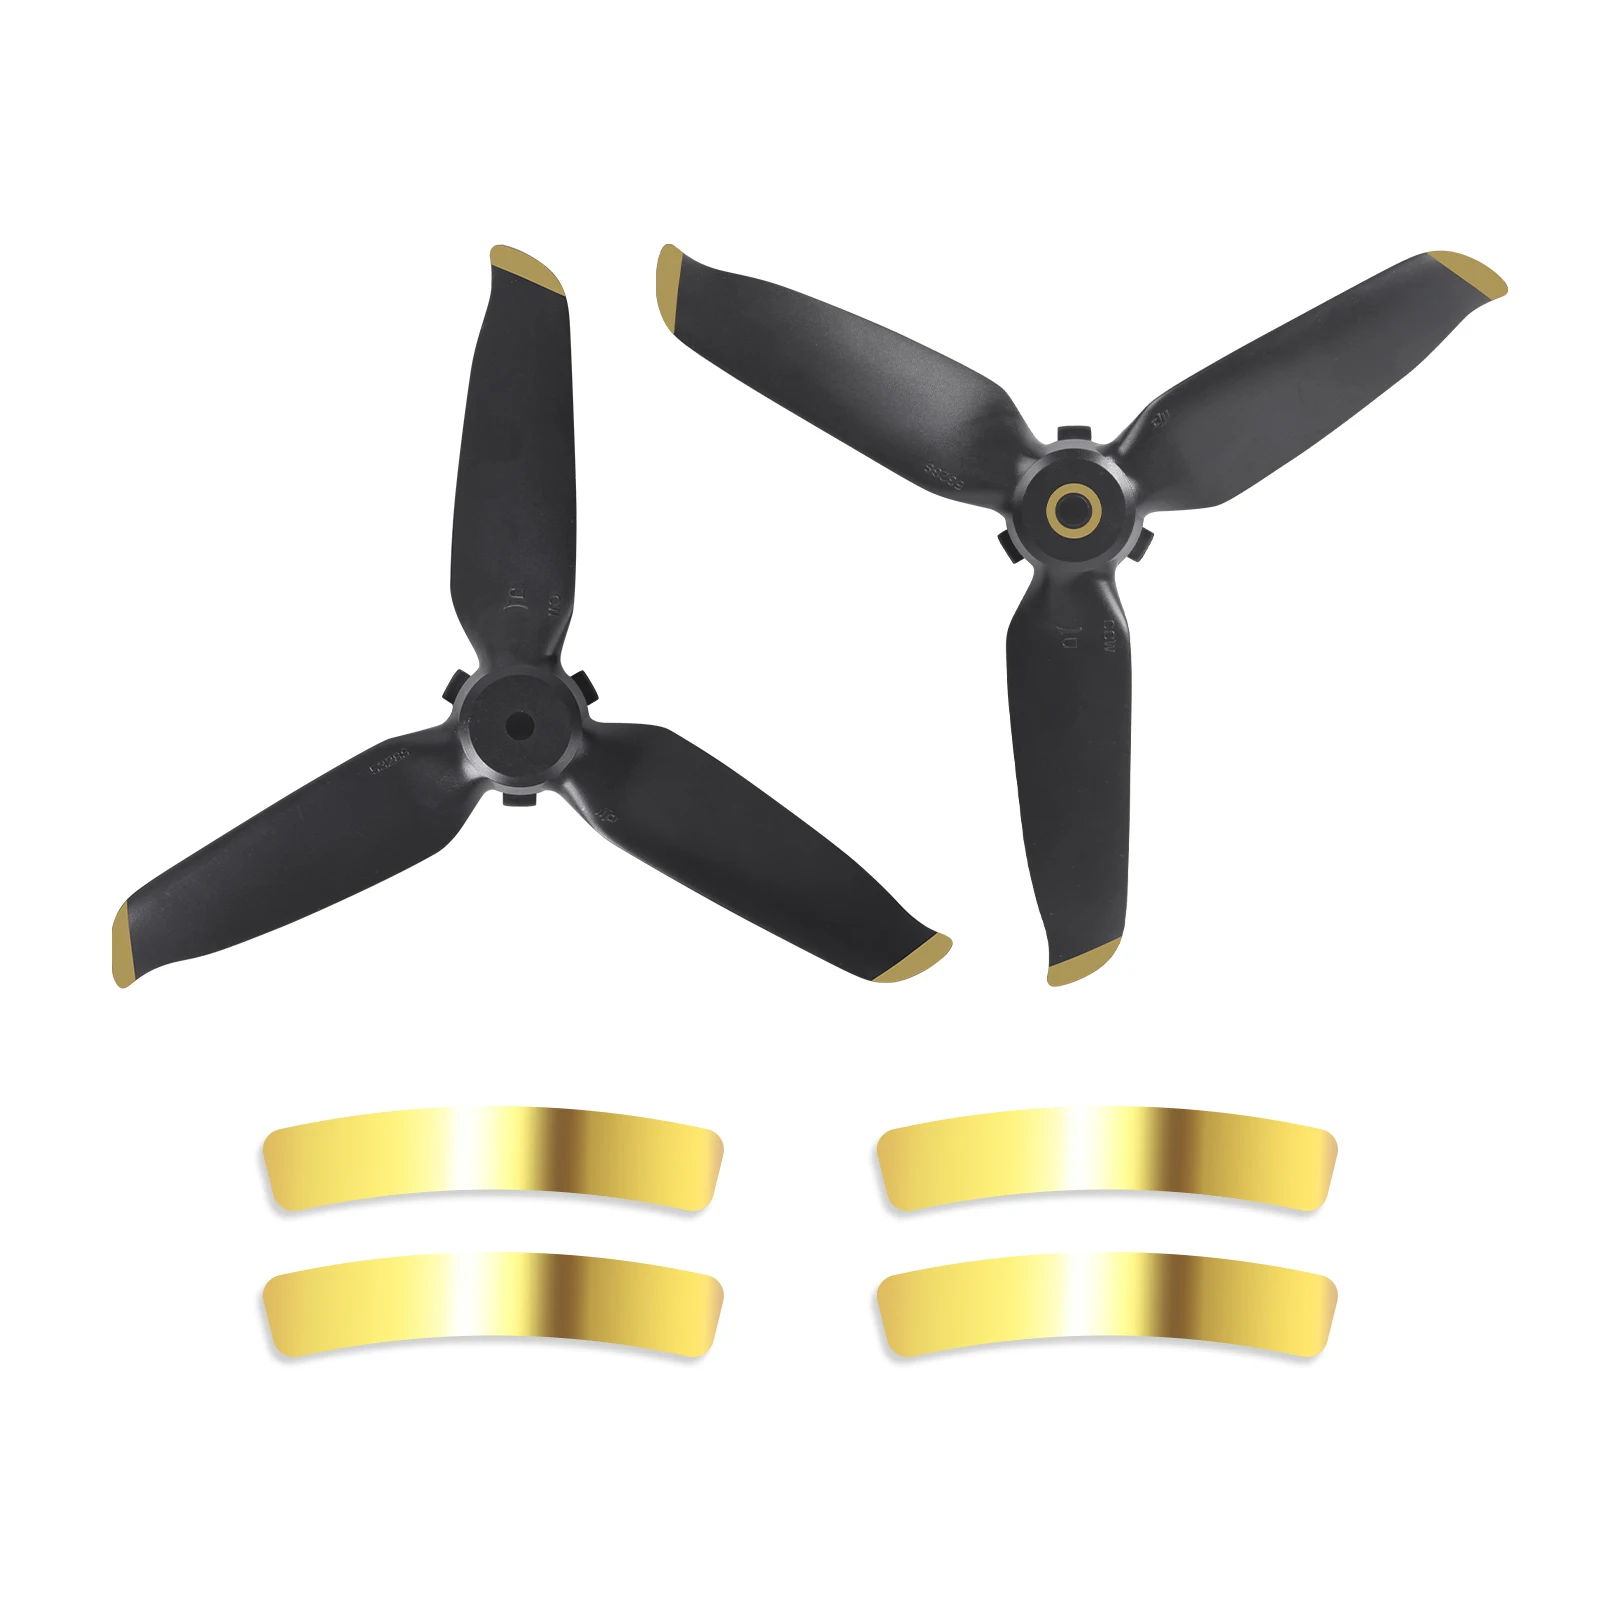 Quick-release 3-Blade 5328S Propeller DJI FPV Drone Blade Props with Arm Sticker for DJI FPV Dron Accessories 